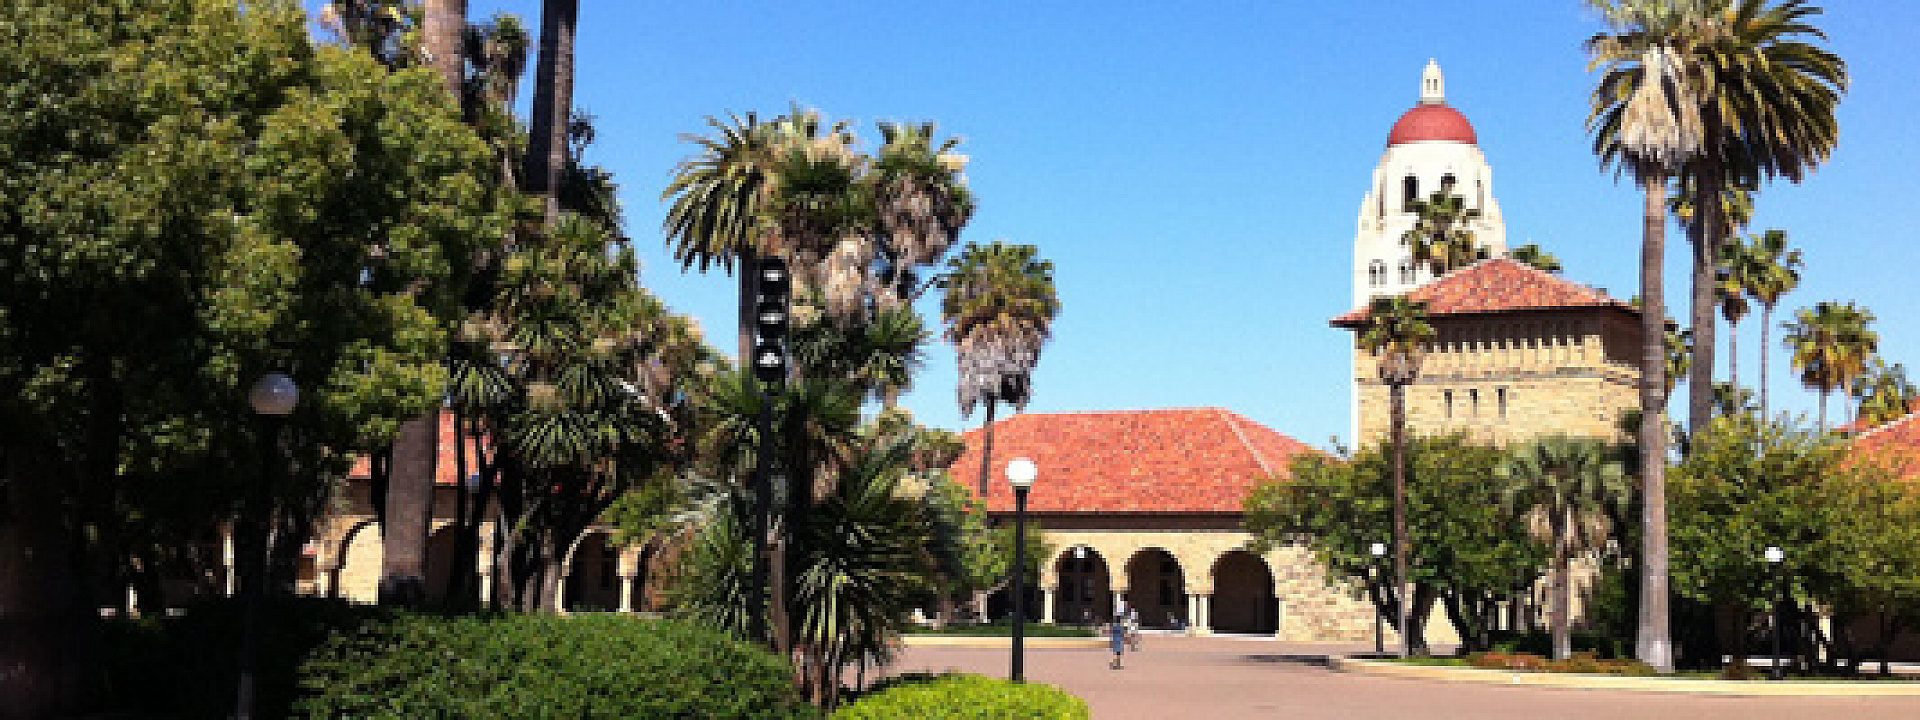 Telfer EMBA Class in Silicon Valley: Student Blog